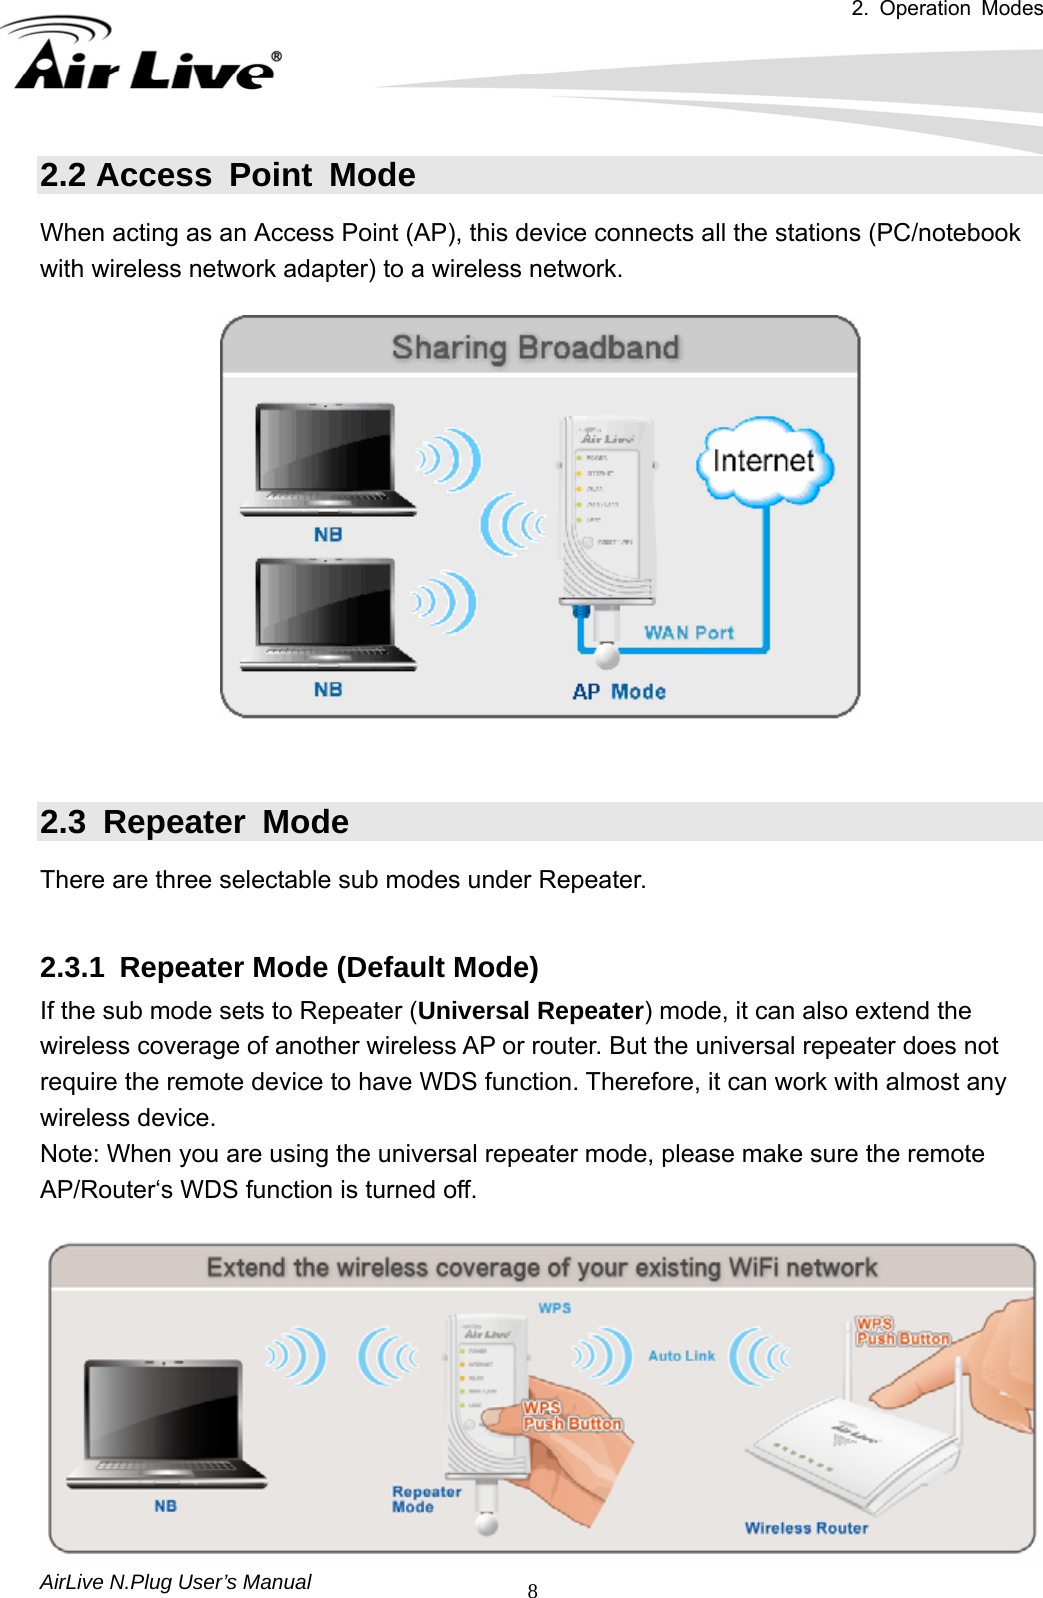 2. Operation Modes  AirLive N.Plug User’s Manual  82.2 Access Point Mode When acting as an Access Point (AP), this device connects all the stations (PC/notebook with wireless network adapter) to a wireless network.    2.3 Repeater Mode There are three selectable sub modes under Repeater.  2.3.1  Repeater Mode (Default Mode) If the sub mode sets to Repeater (Universal Repeater) mode, it can also extend the wireless coverage of another wireless AP or router. But the universal repeater does not require the remote device to have WDS function. Therefore, it can work with almost any wireless device. Note: When you are using the universal repeater mode, please make sure the remote AP/Router‘s WDS function is turned off.   